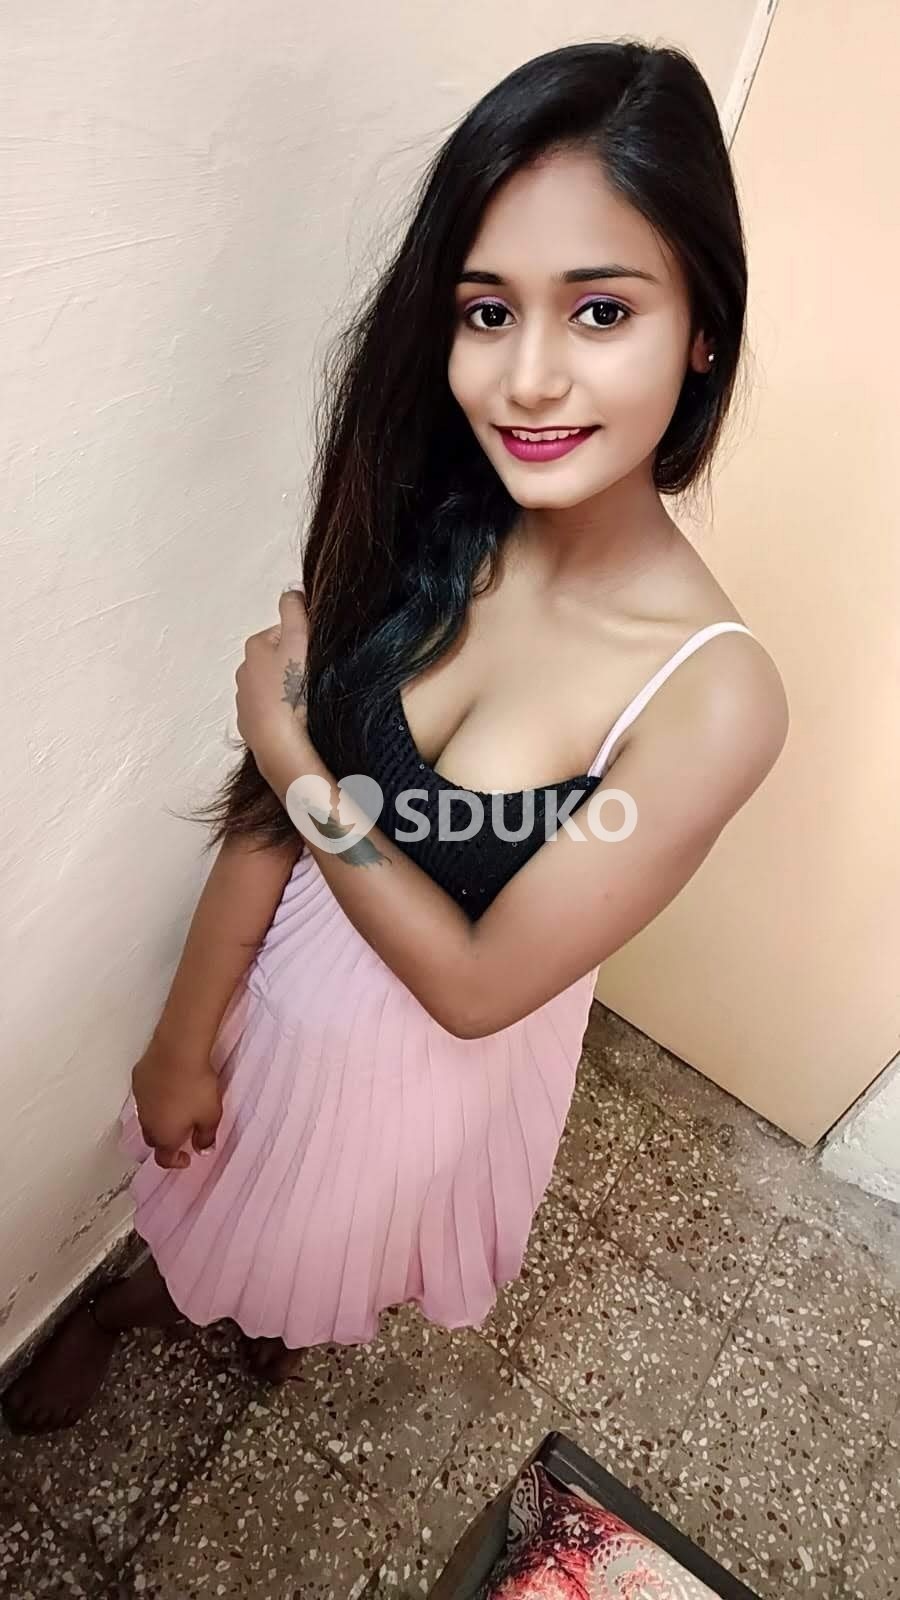 Andheri BEST DIRECT LOW PRICE BEST VIP GENUINE COLLEGE GIRL SERVICE AVAILABLE FULL SATISFACTION TOP MODEL